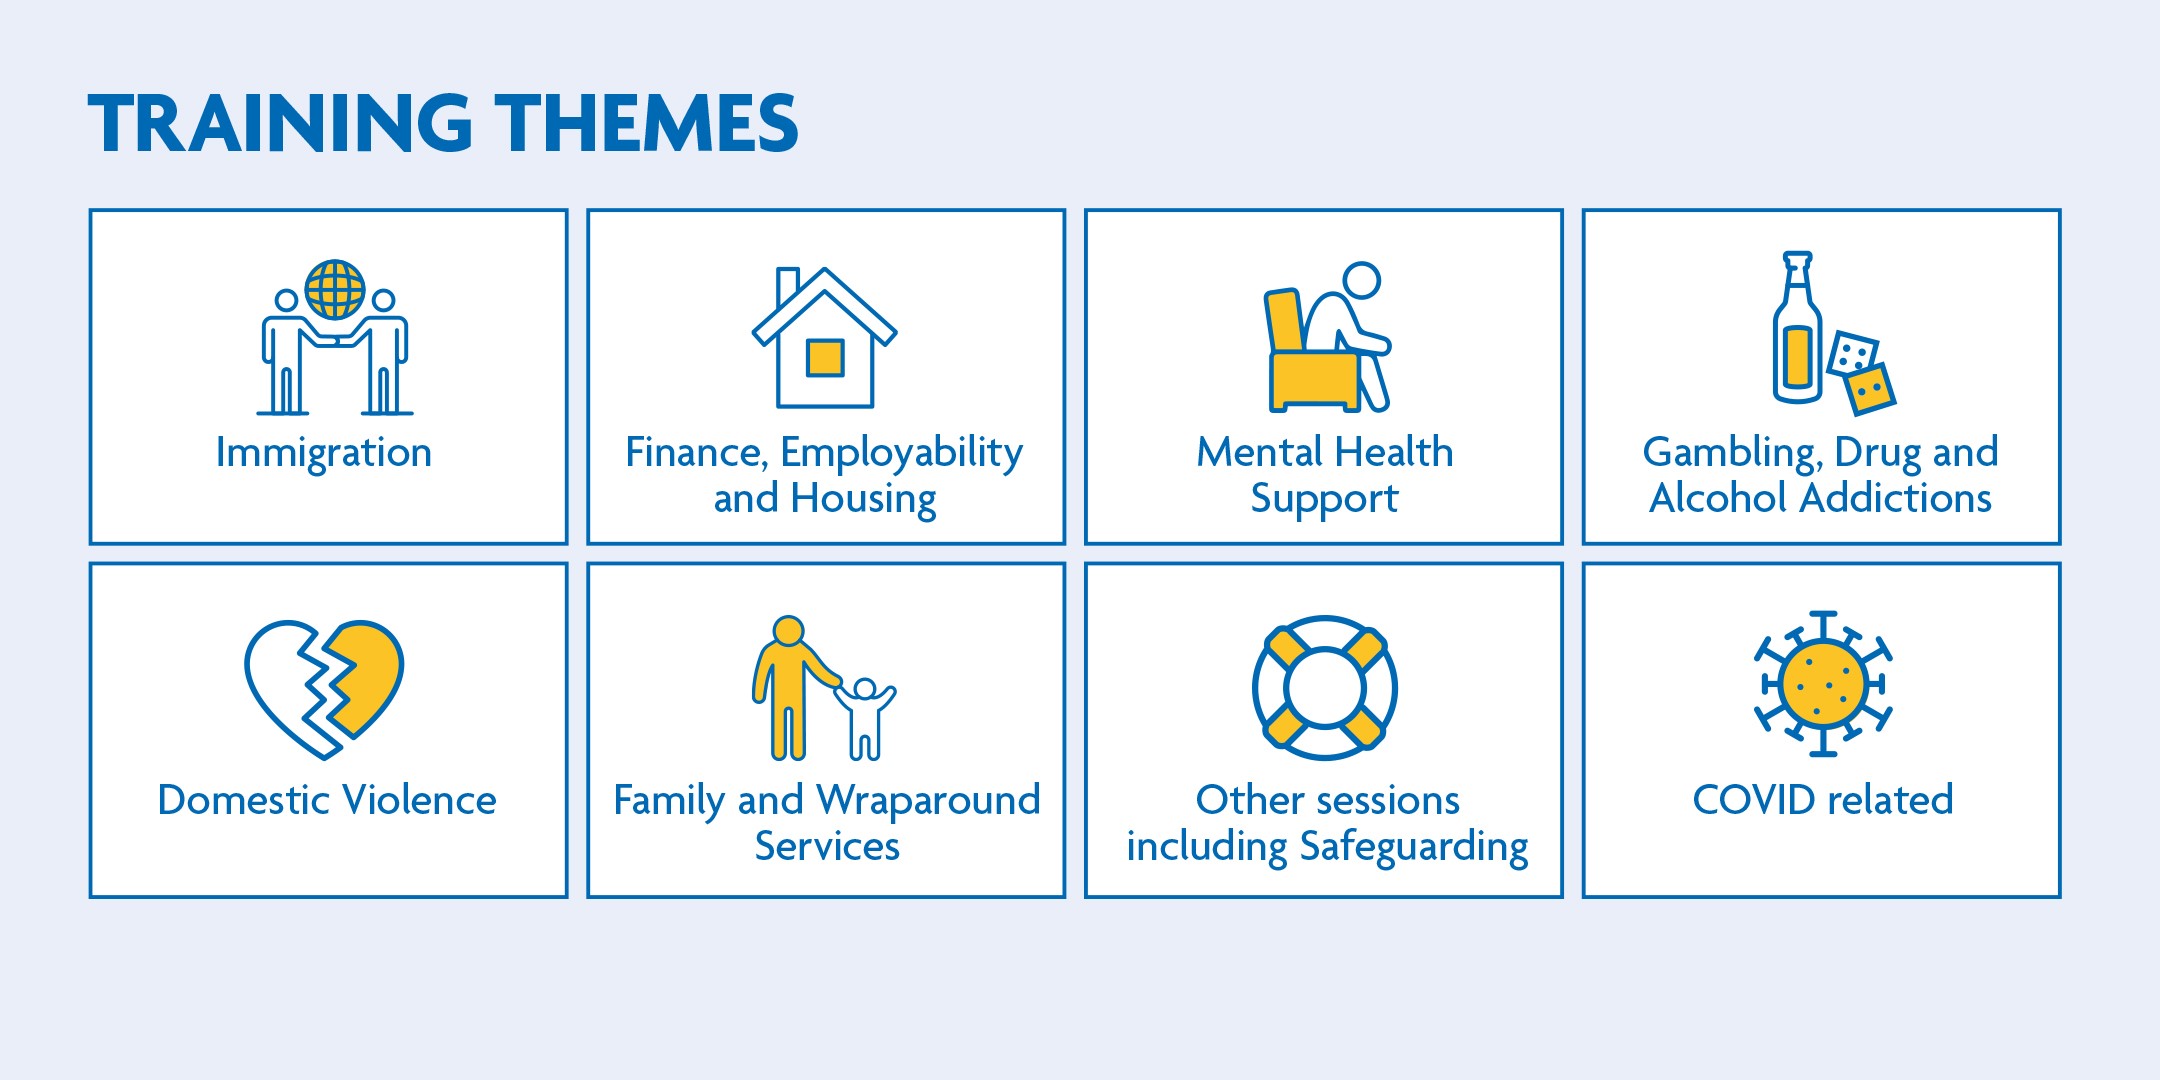 Training Themes: immigration, finance, employability and housing, mental health support, addiction, domestic abuse, family and wraparound services, safeguarding, COVID related